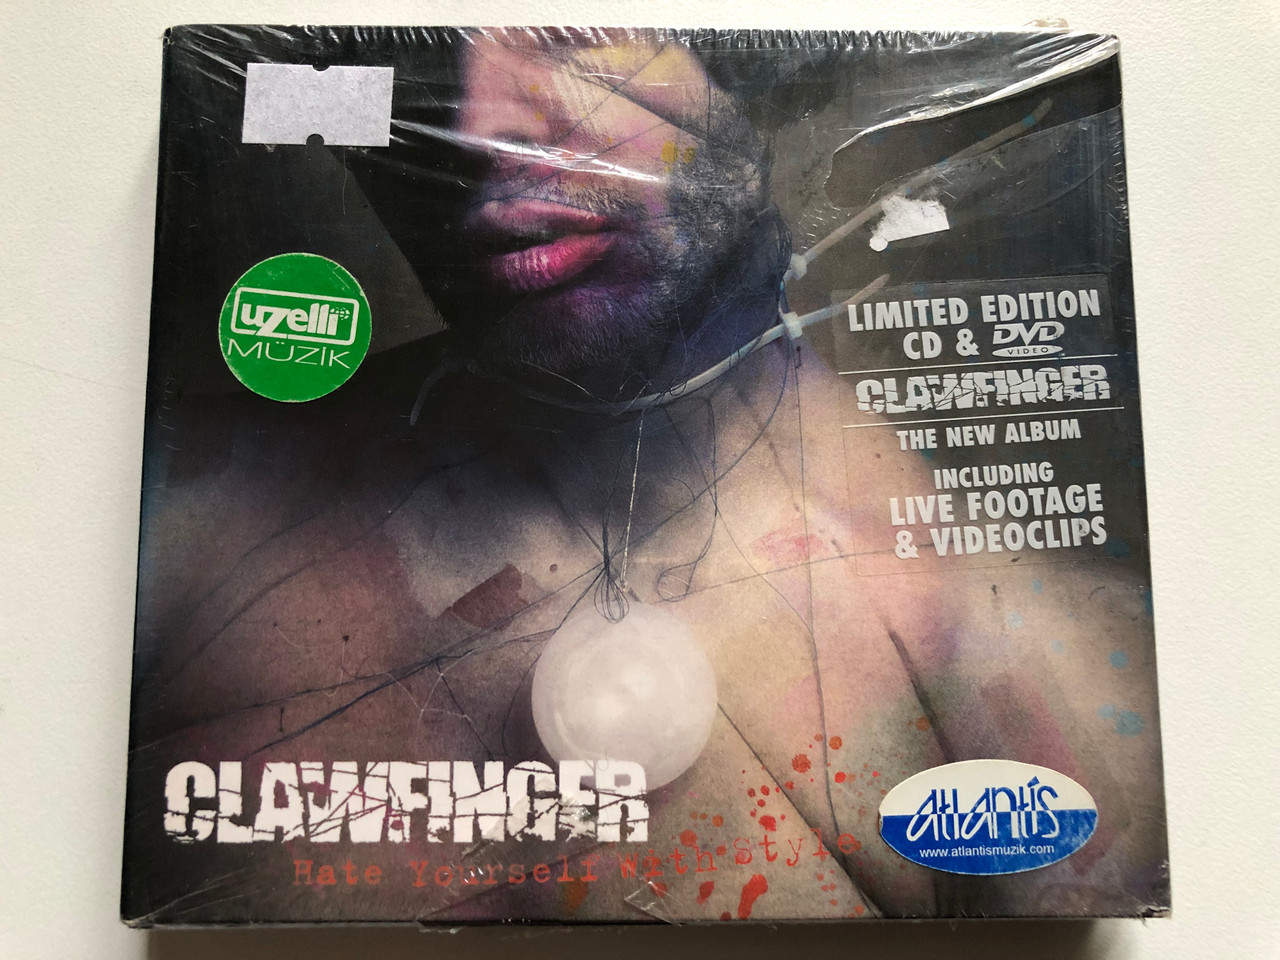 https://cdn11.bigcommerce.com/s-62bdpkt7pb/products/0/images/316770/Clawfinger_Hate_Yourself_With_Style_Limited_Edition_The_New_Album_Including_Live_Footage_Videoclips_Nuclear_Blast_Audio_CD_DVD_Video_CD_2005_27361_15505_1__45761.1702918739.1280.1280.JPG?c=2